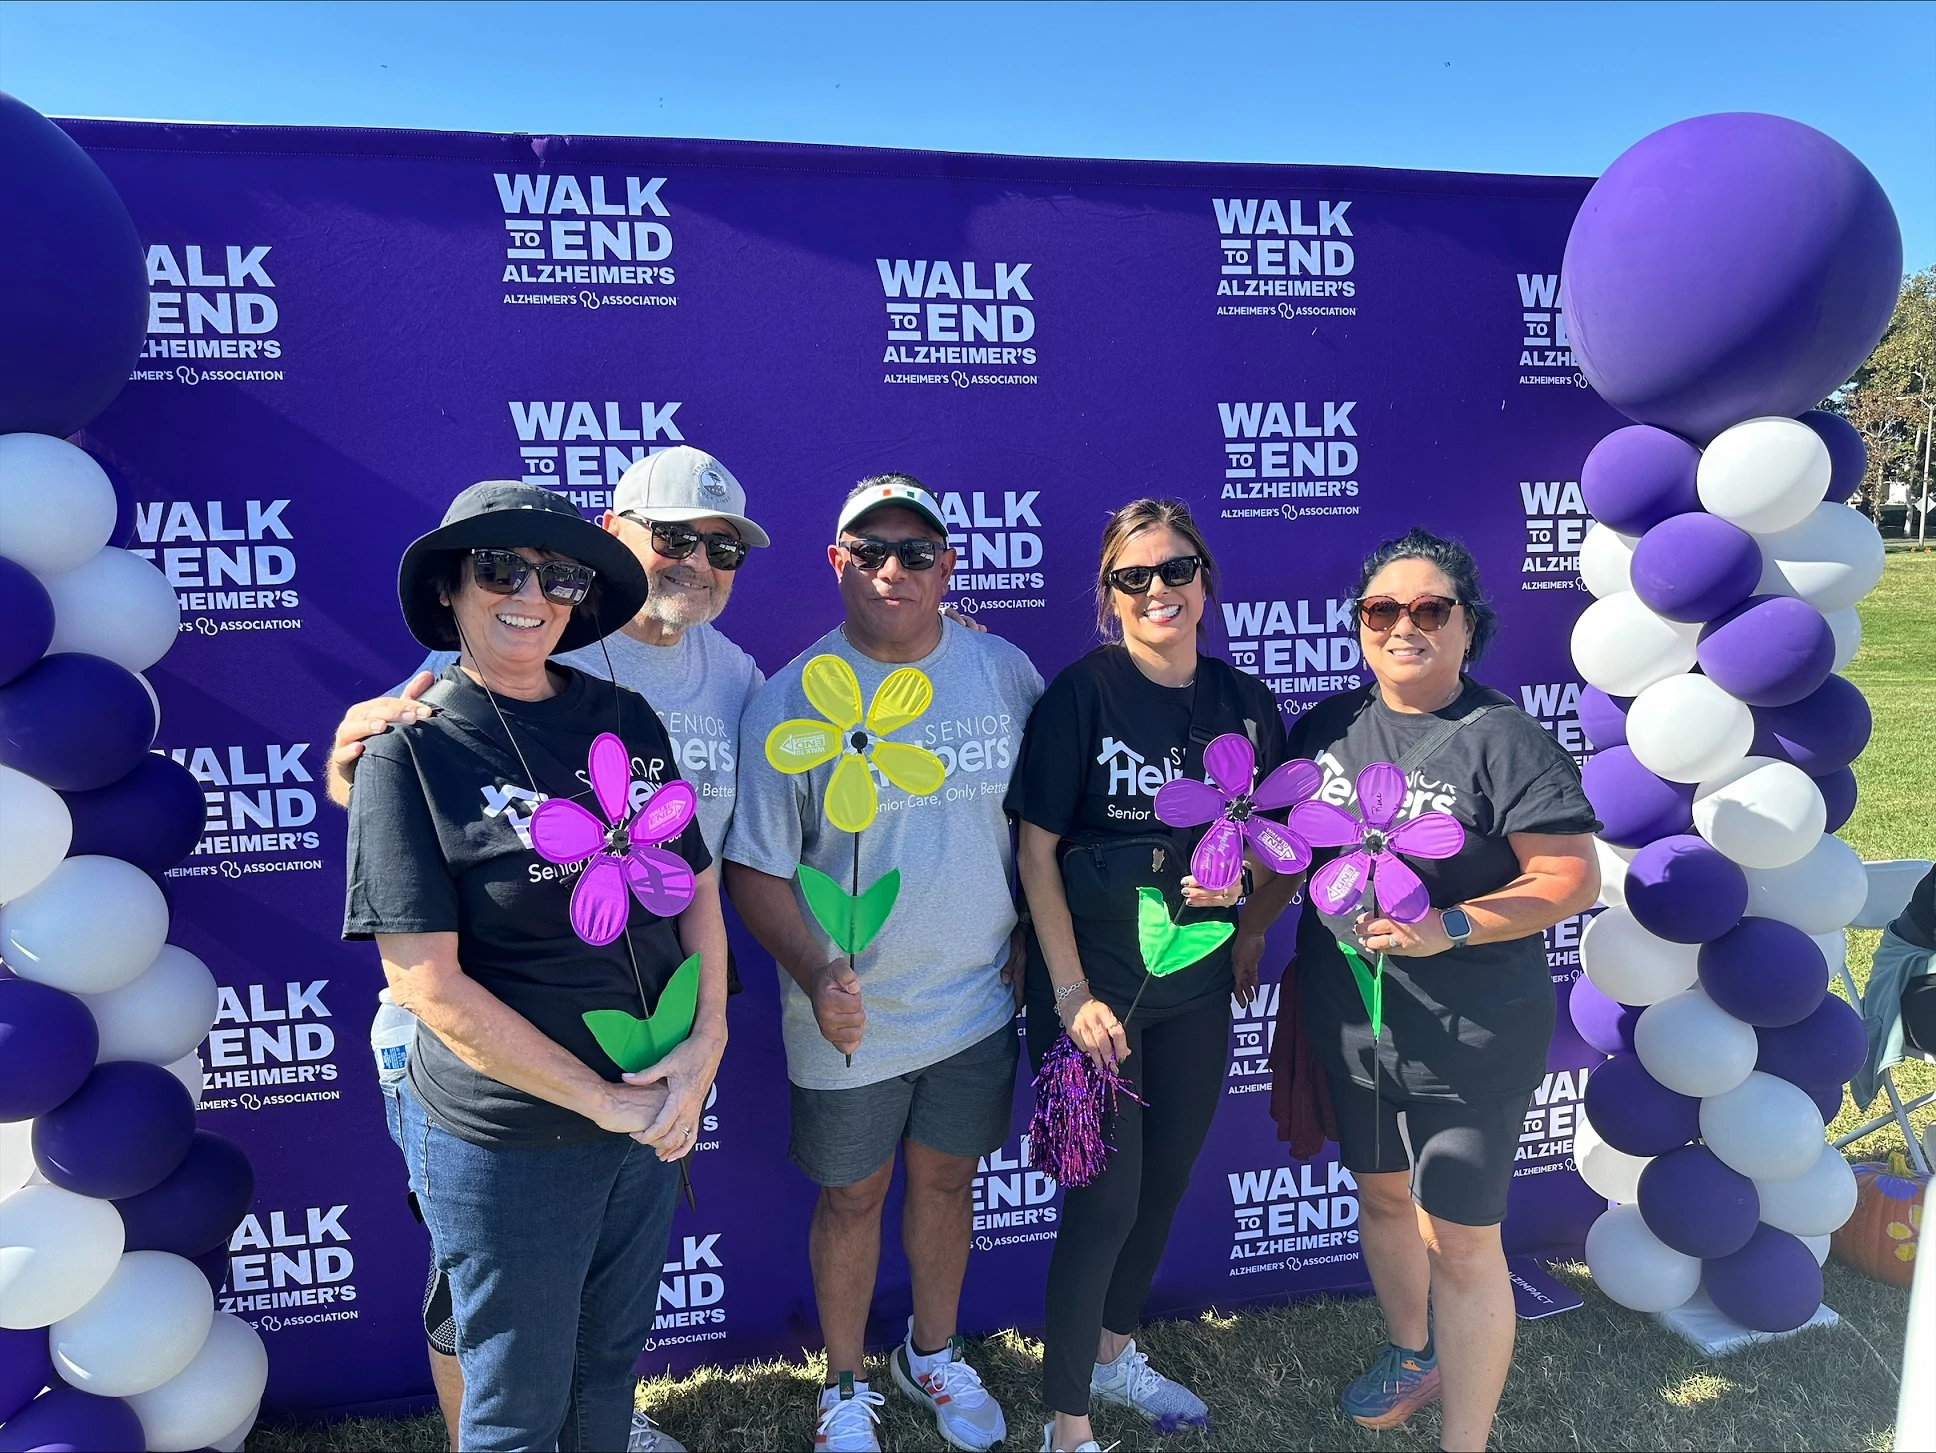 Great time today at the Alzheimer's Association, Orange County Chapter Walk to End Alzheimer’s event. Great time! Great people! Great cause! We walked for my mom, Angeles V. Munoz. We will win this fight!